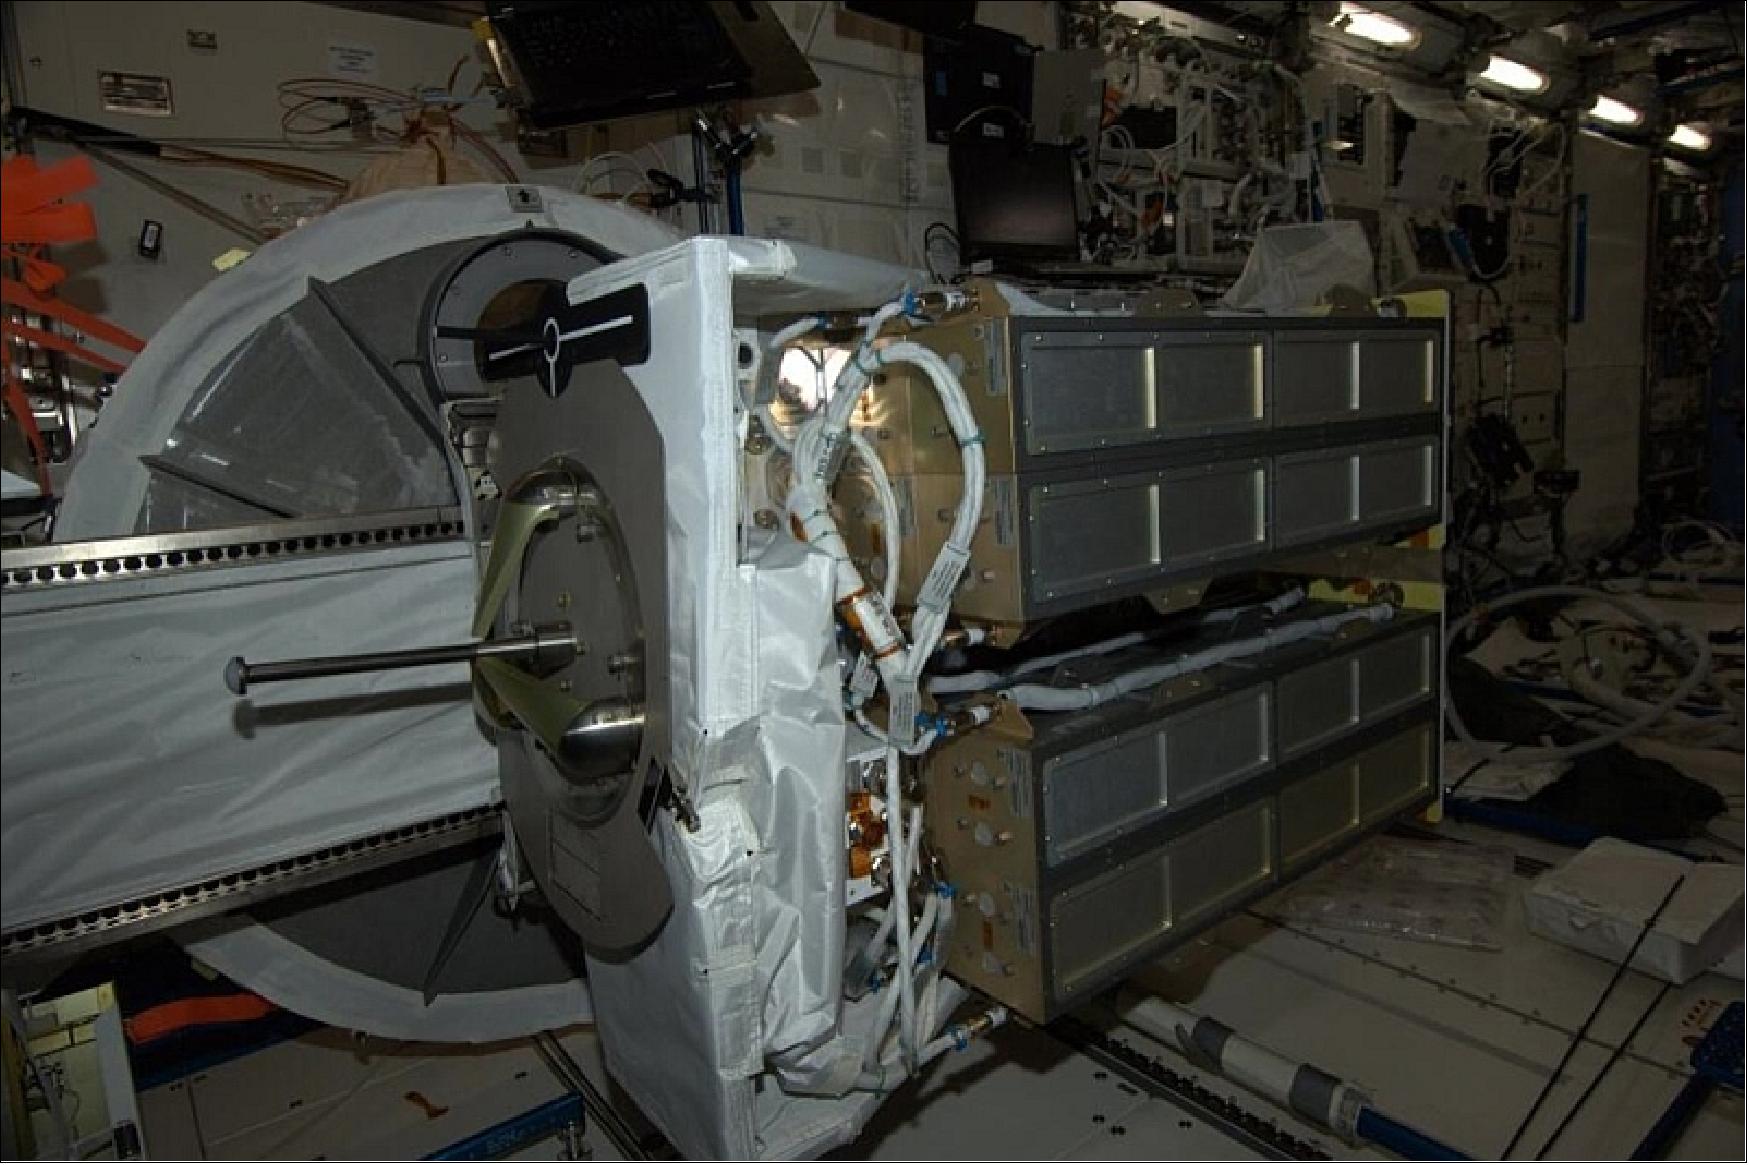 Figure 50: The Flock 1 nanosatellites are prepared for deployment on board the ISS. The photo shows four NRCSDs (NanoRacks CubeSat Deployers), each containing two Doves (image credit: Astronaut Koichi Wakata)